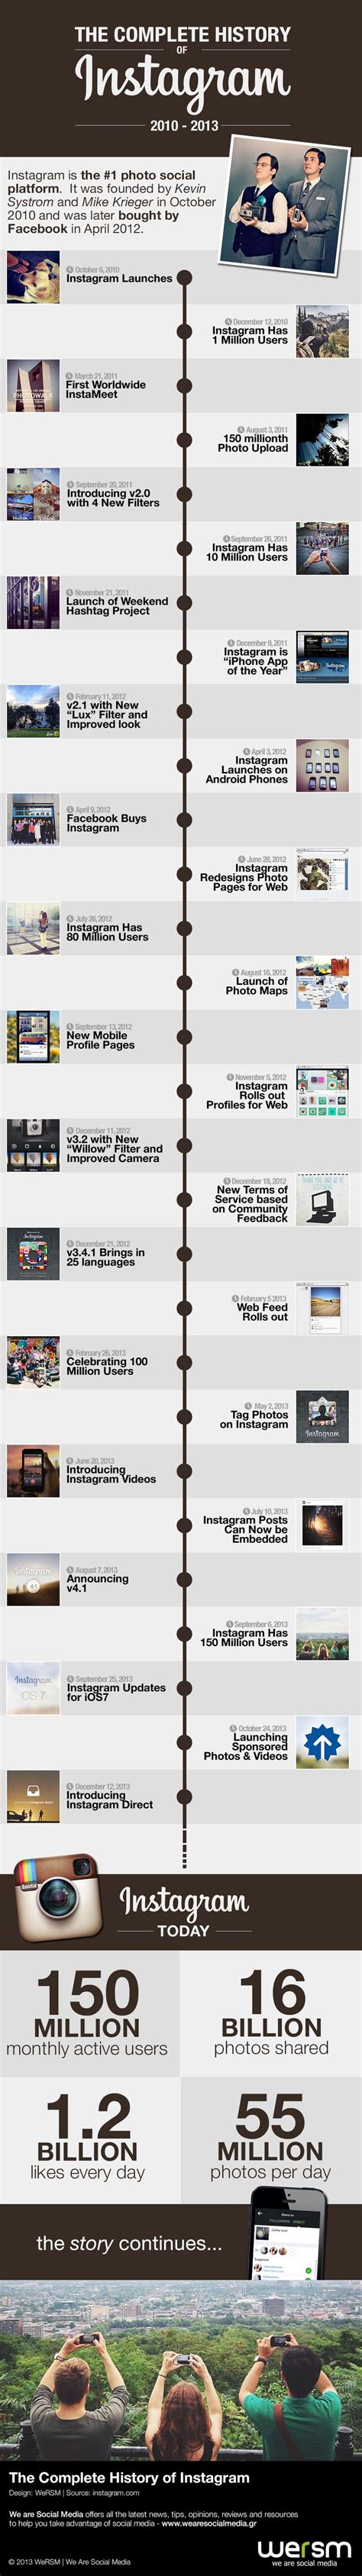 The Timeline Of Instagram From 2010 To Present Infographic